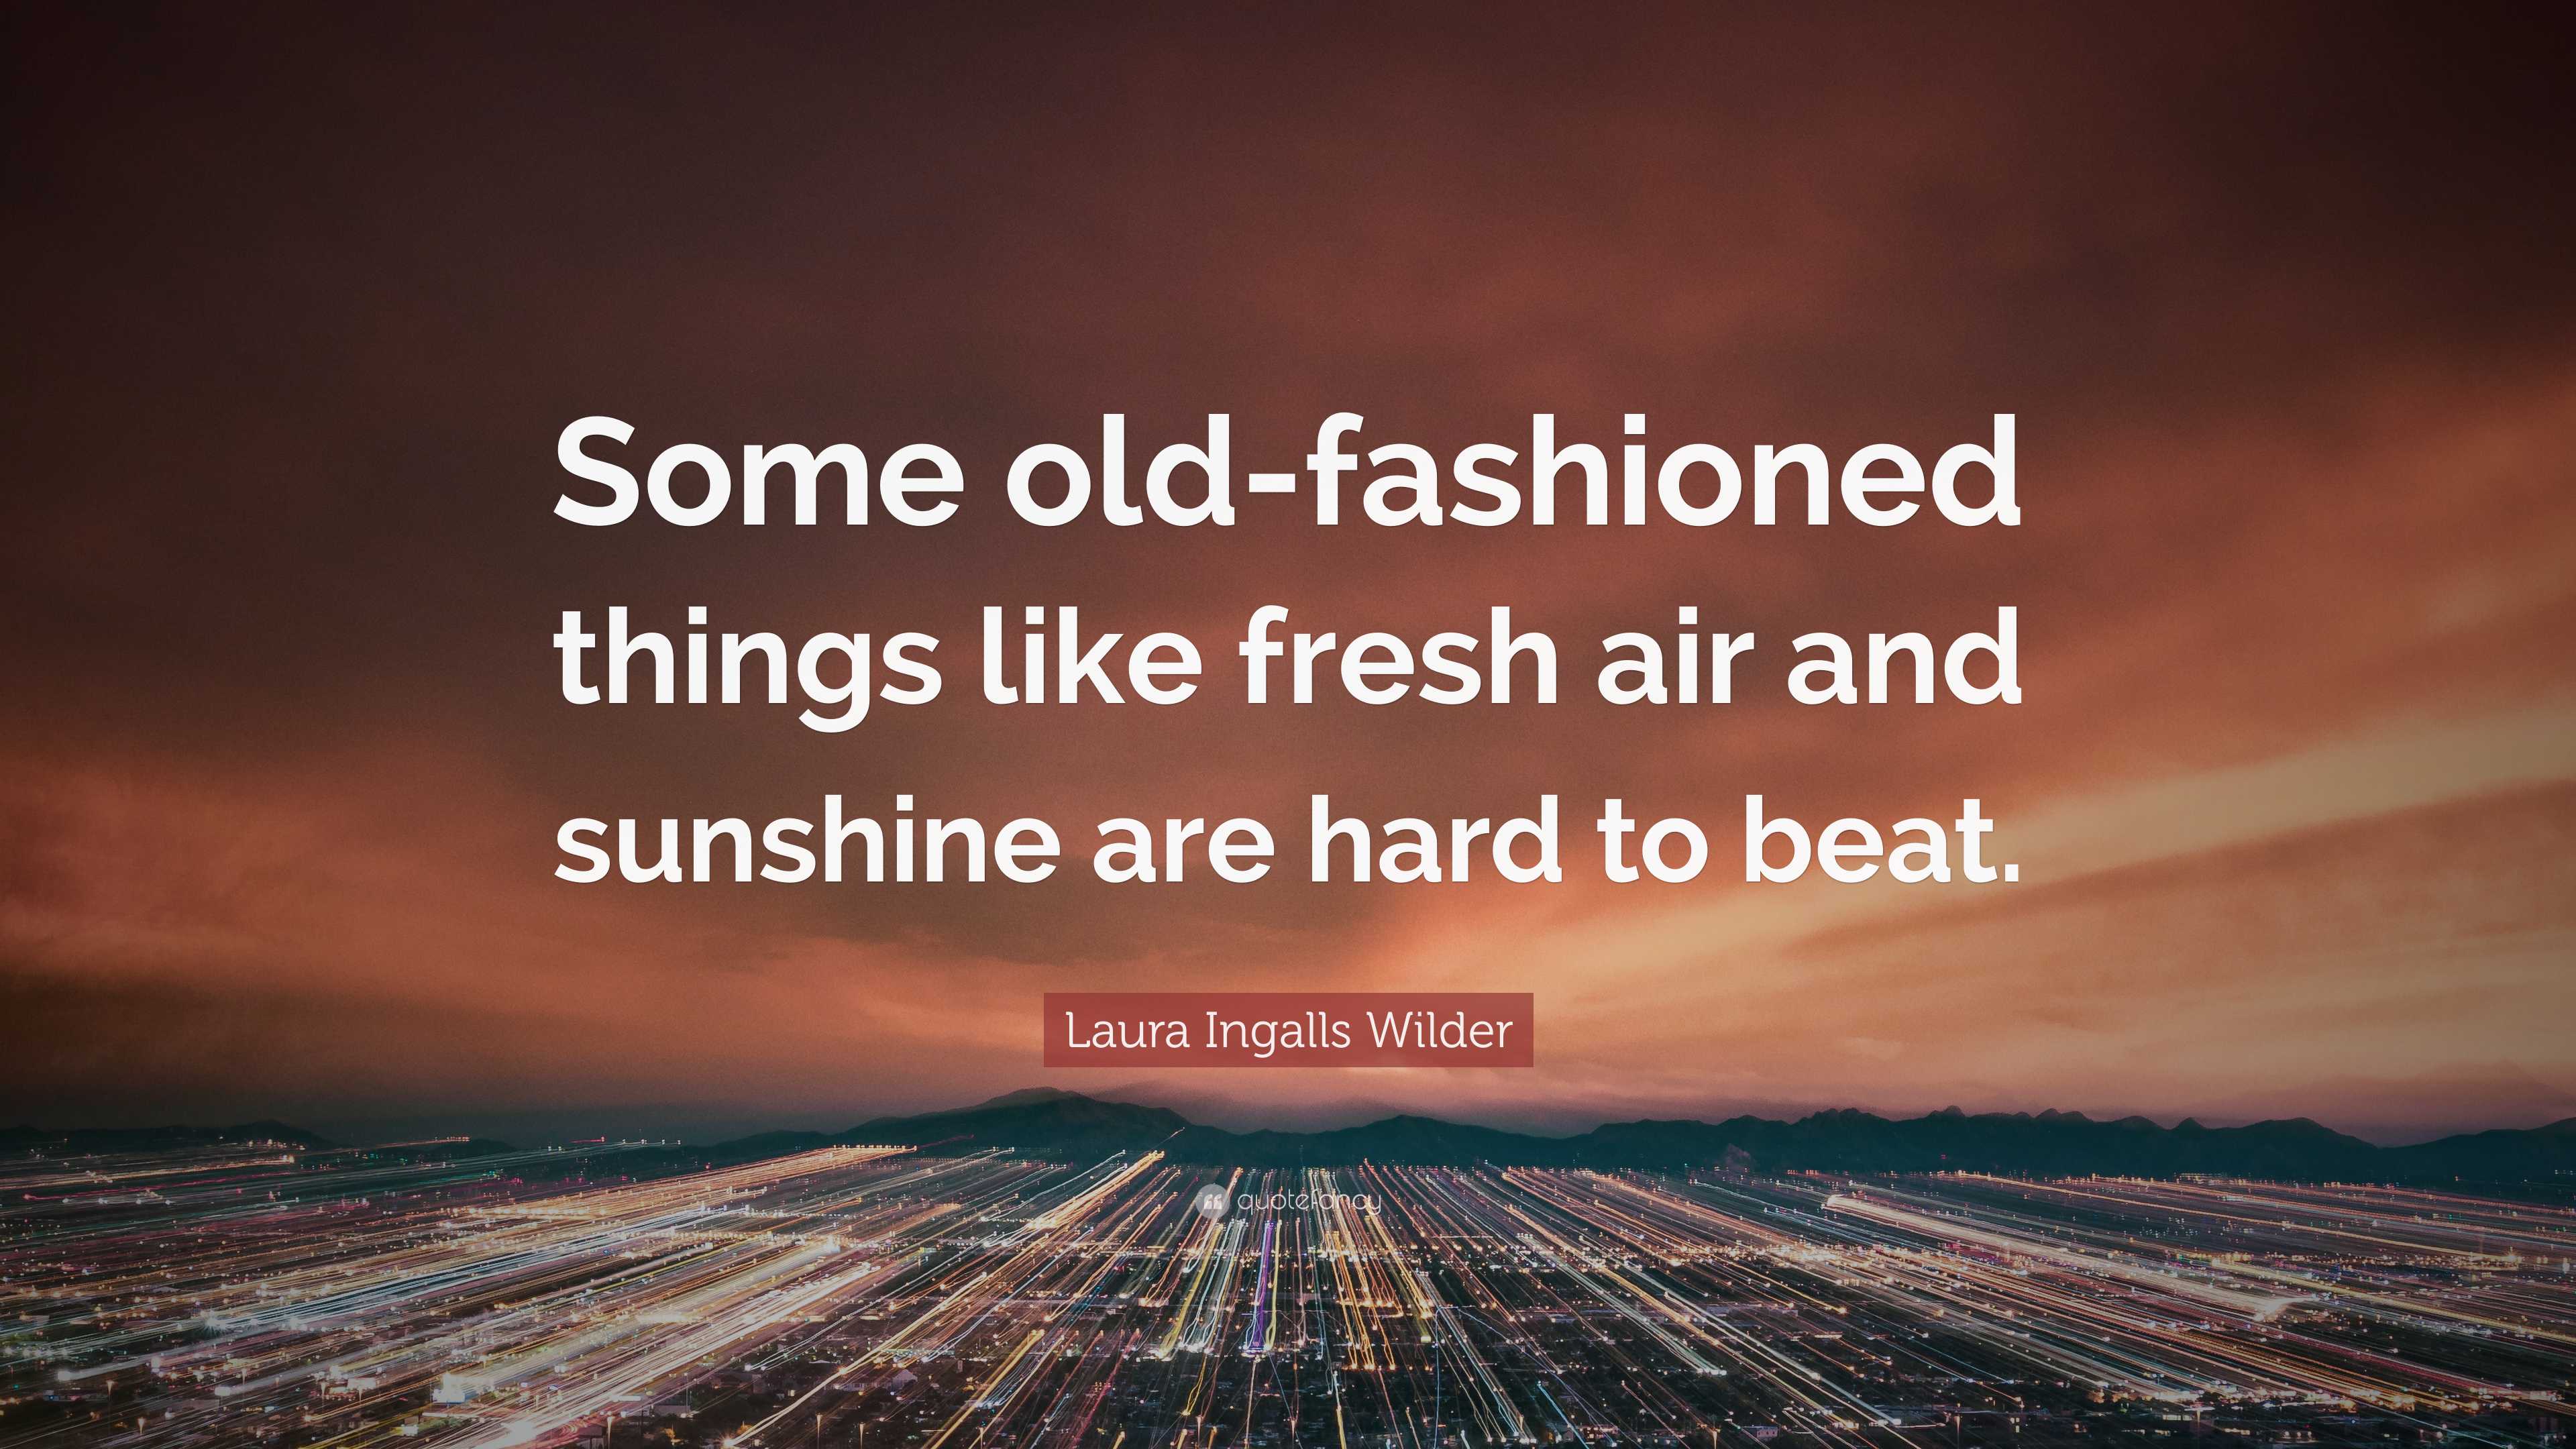 Some old fashioned things like fresh air & sunshine are hard to